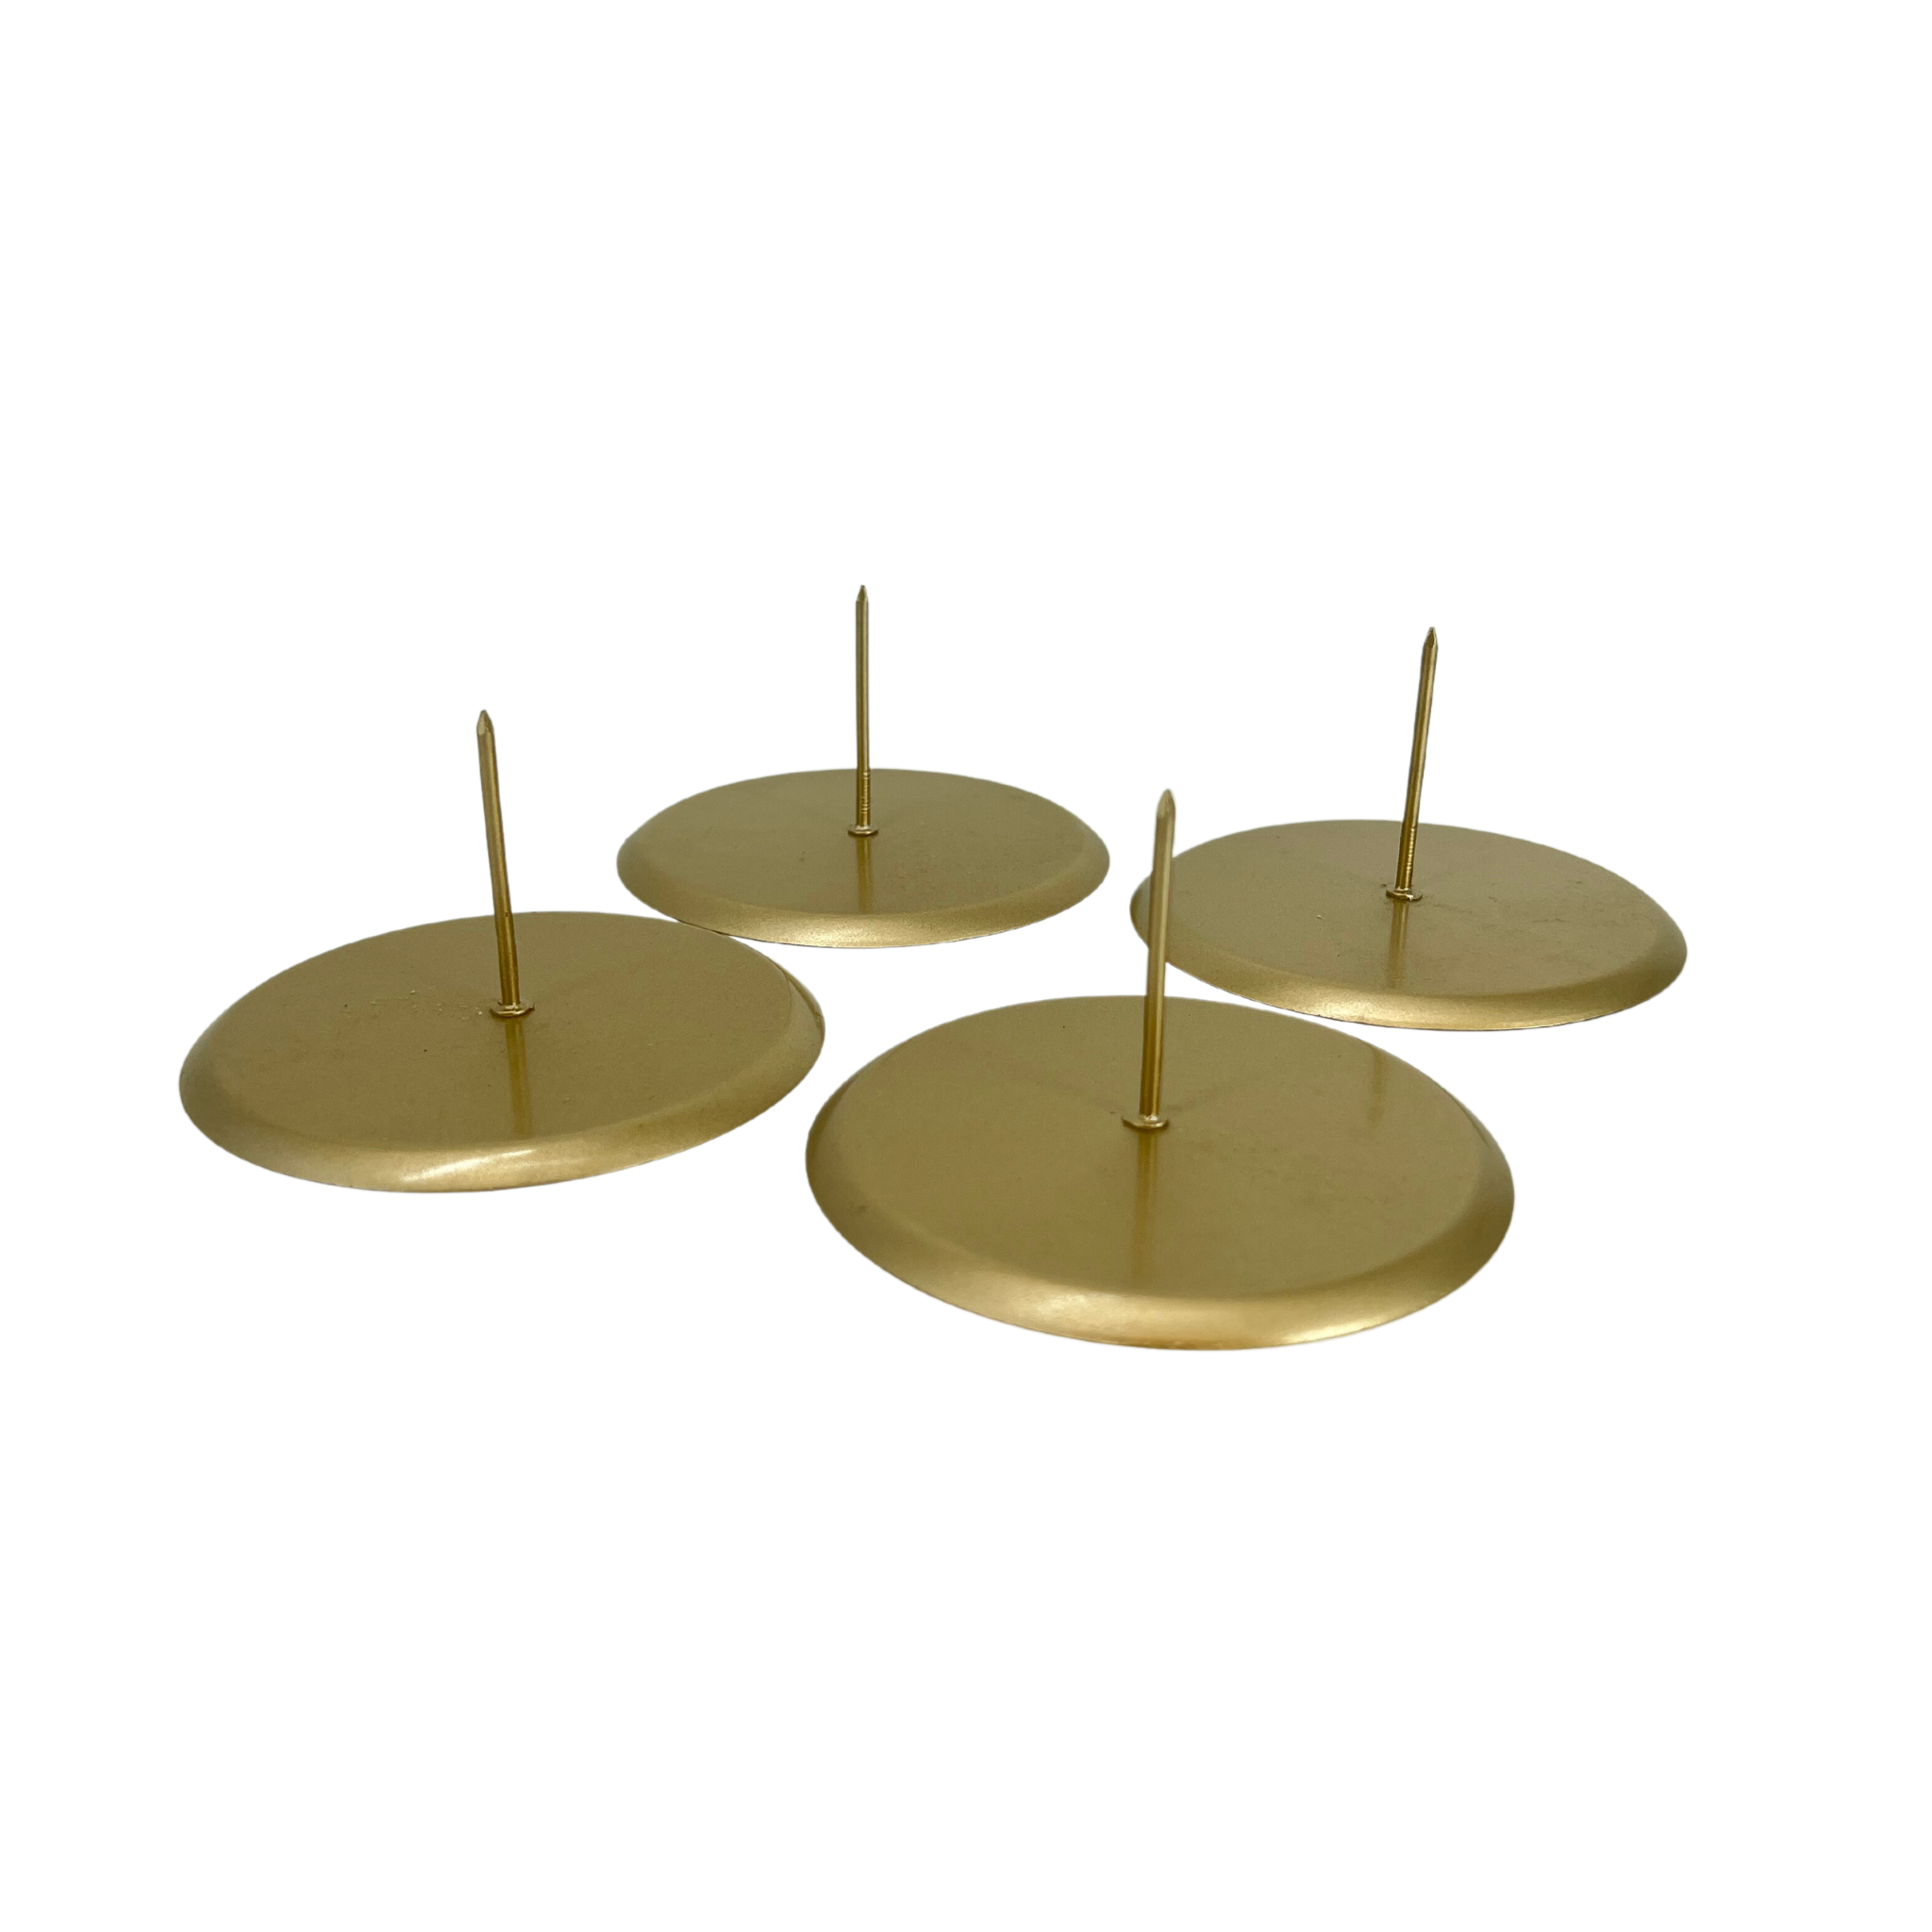 Lavabis candle holder pillar candle 4 pieces - 0